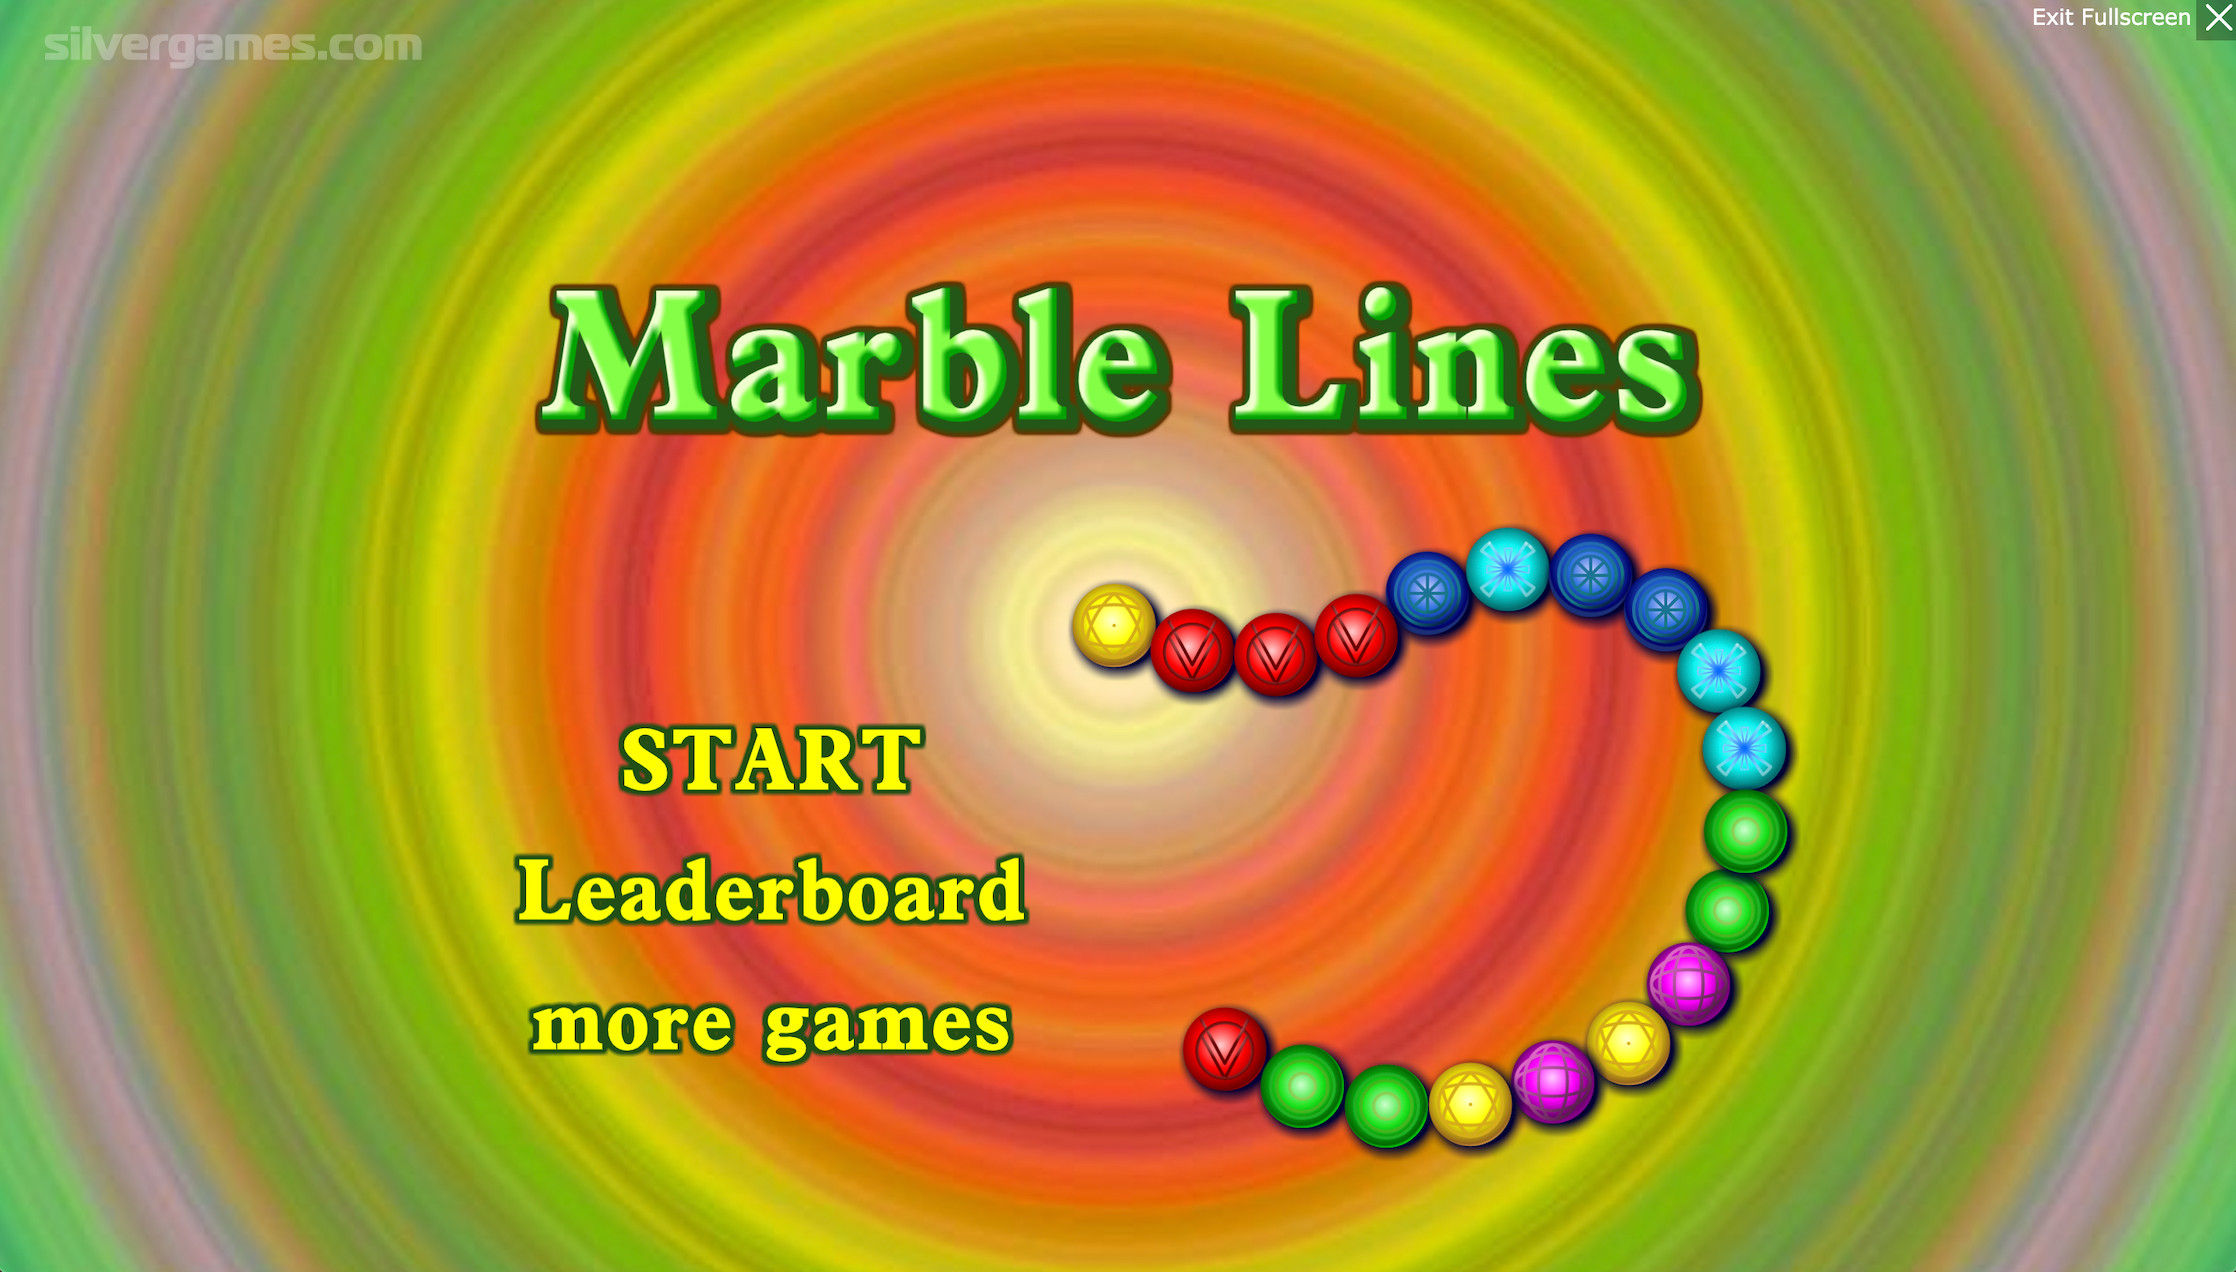 Marble Lines